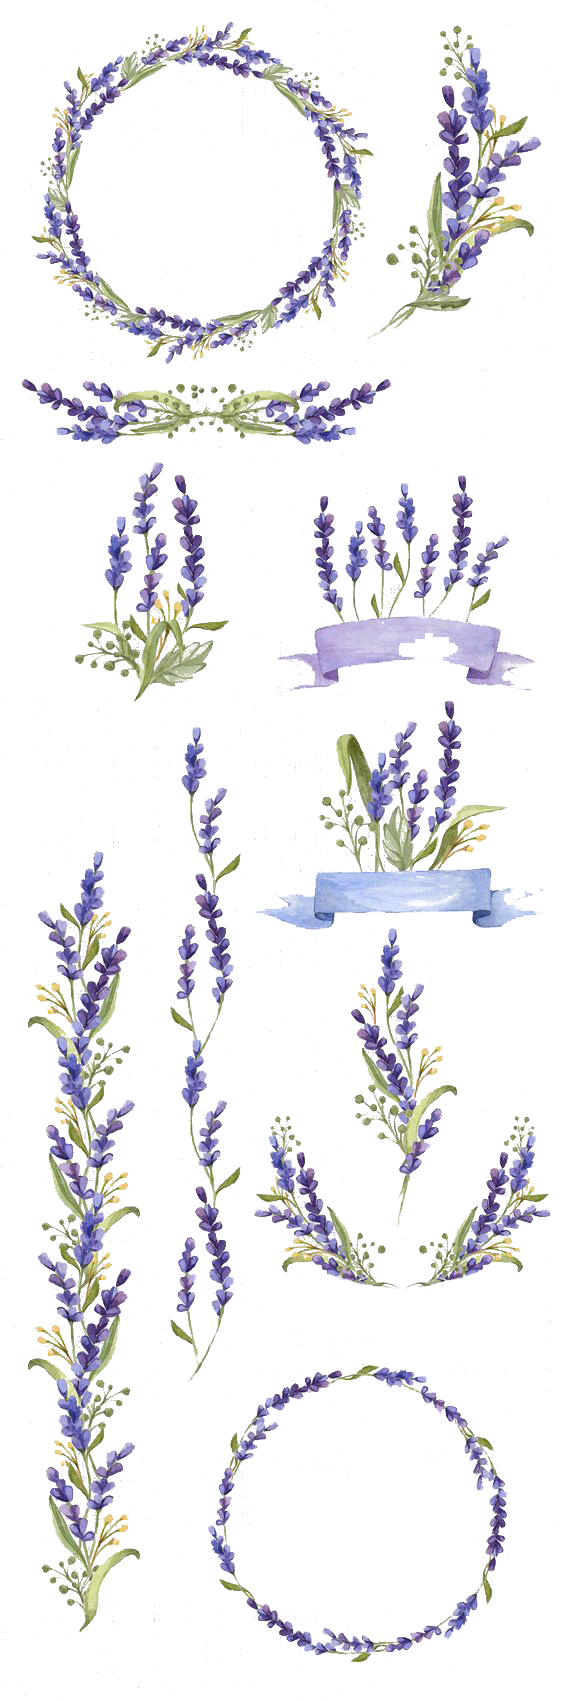 Flower Art Lavender Watercolor Flowers Painting Hand-Painted Clipart